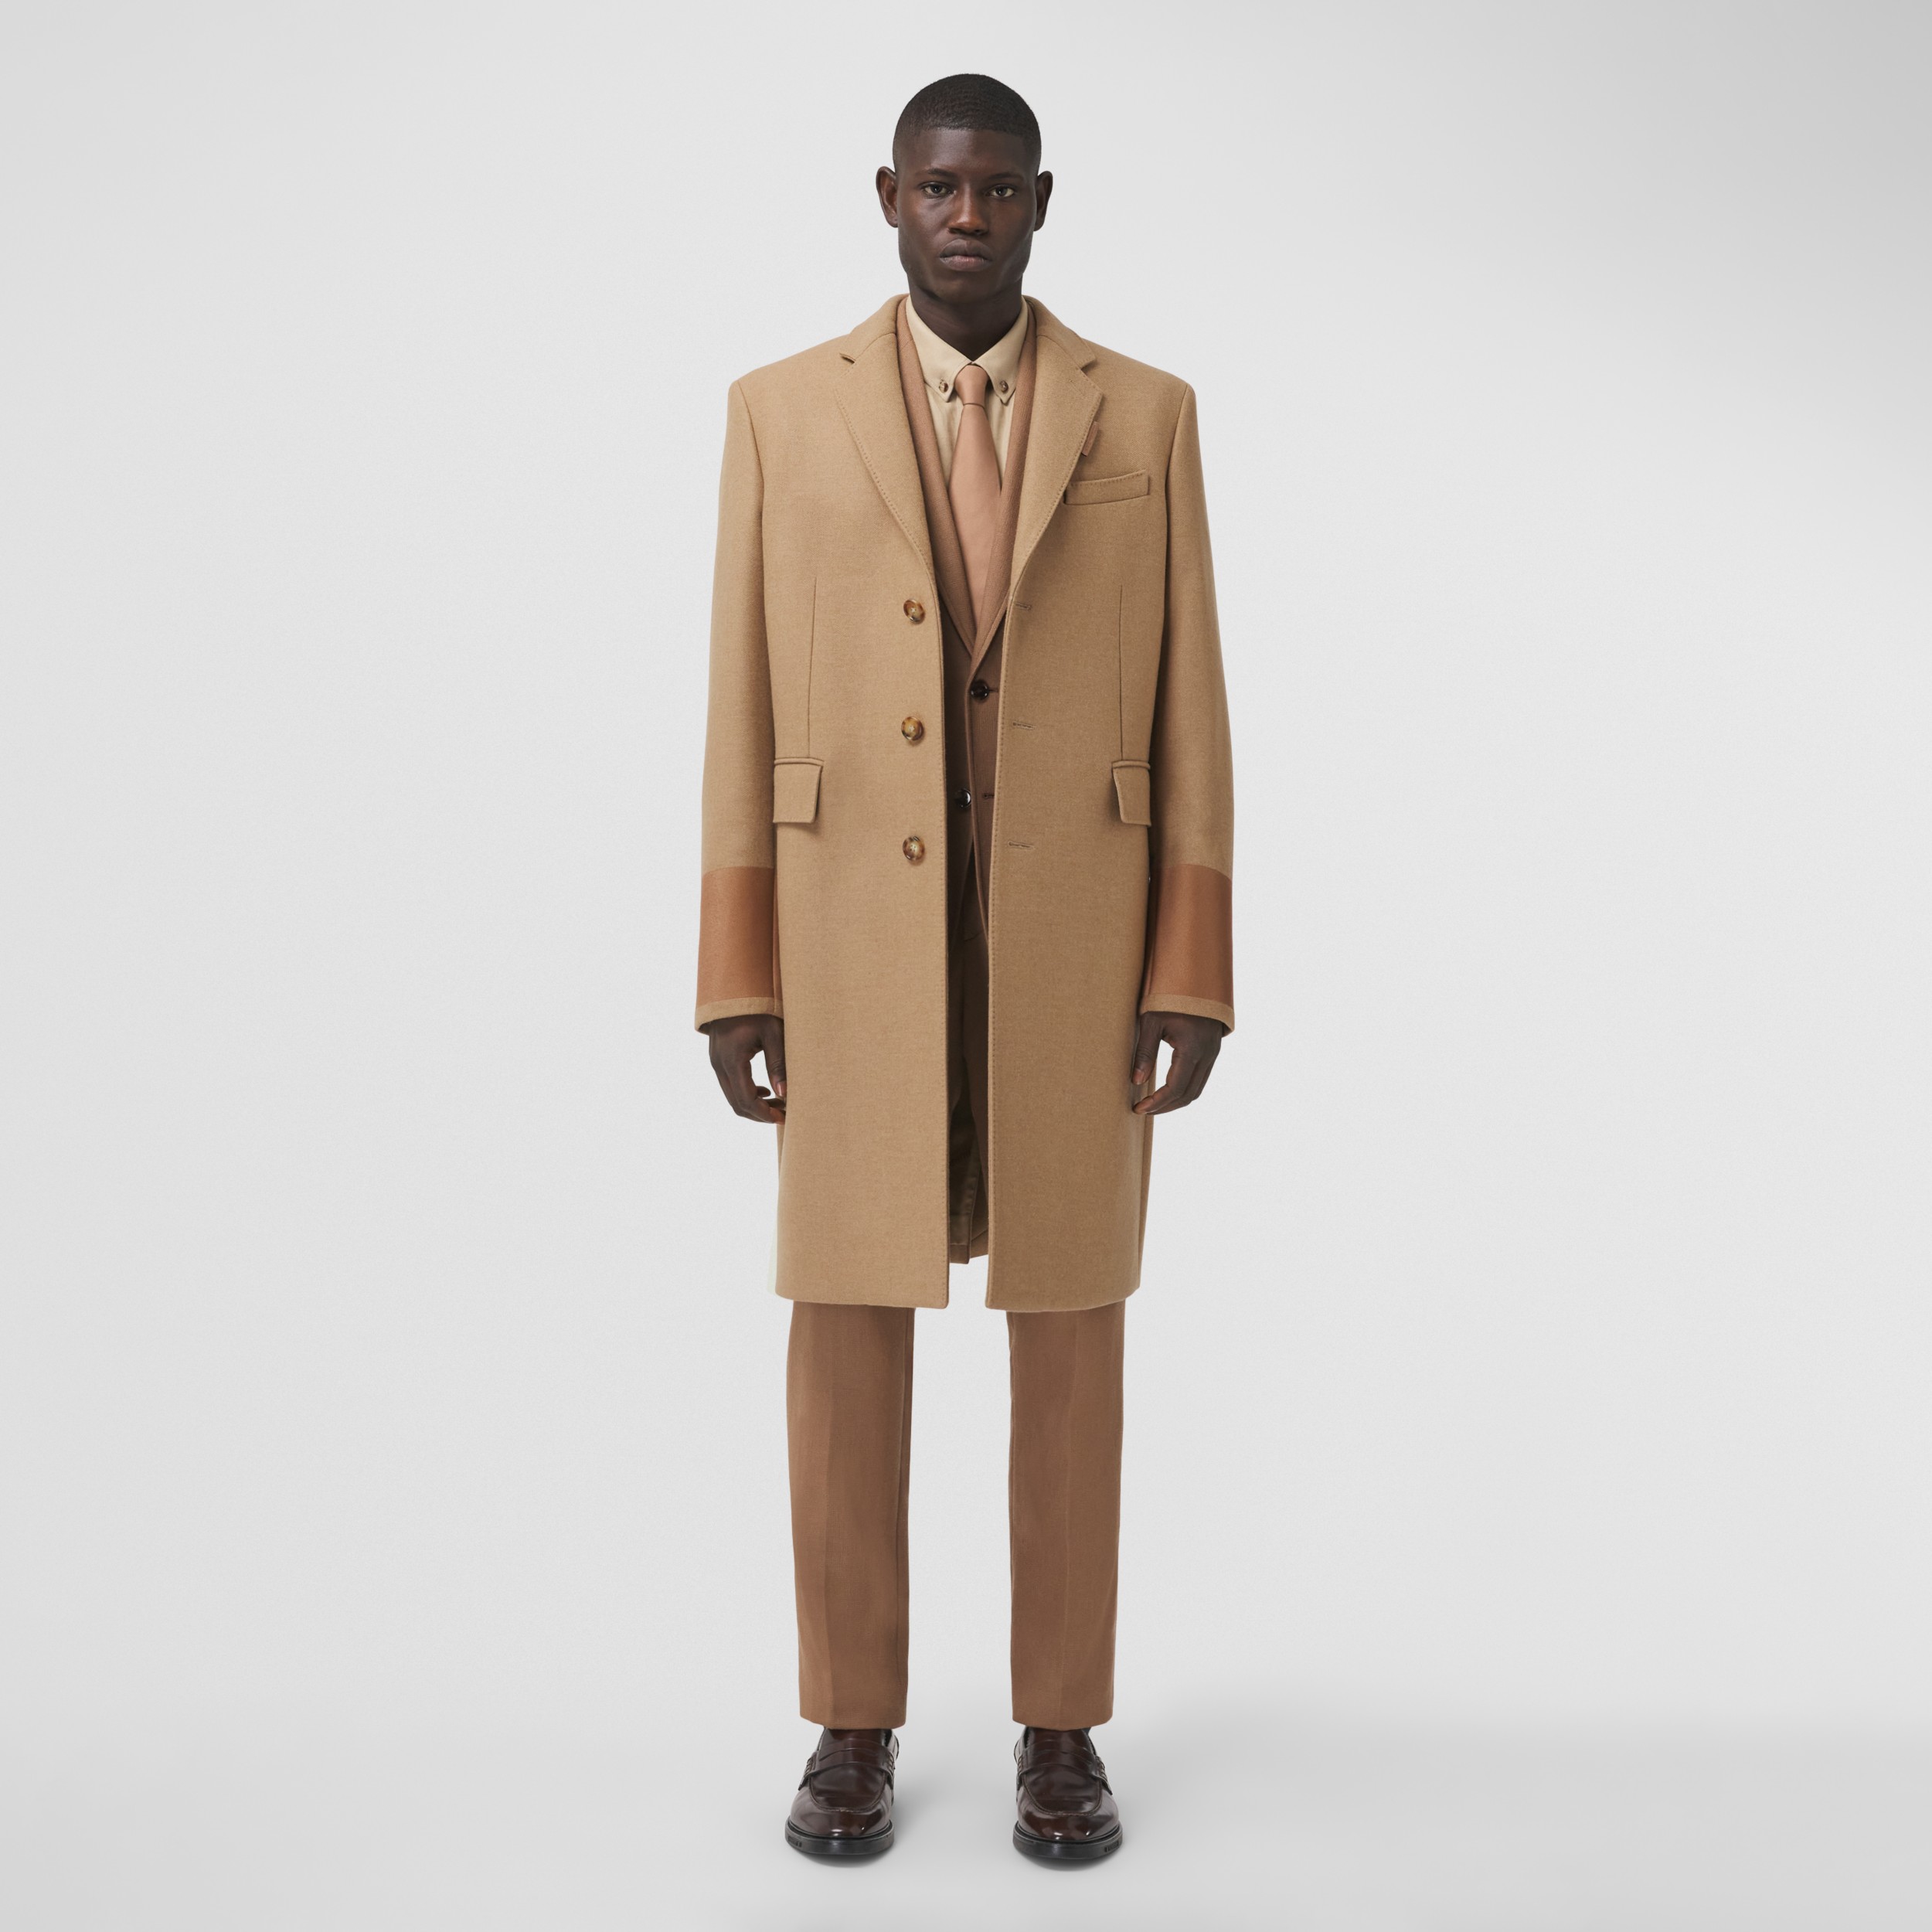 Cuff Detail Camel Hair Wool Tailored Coat - Men | Burberry United States